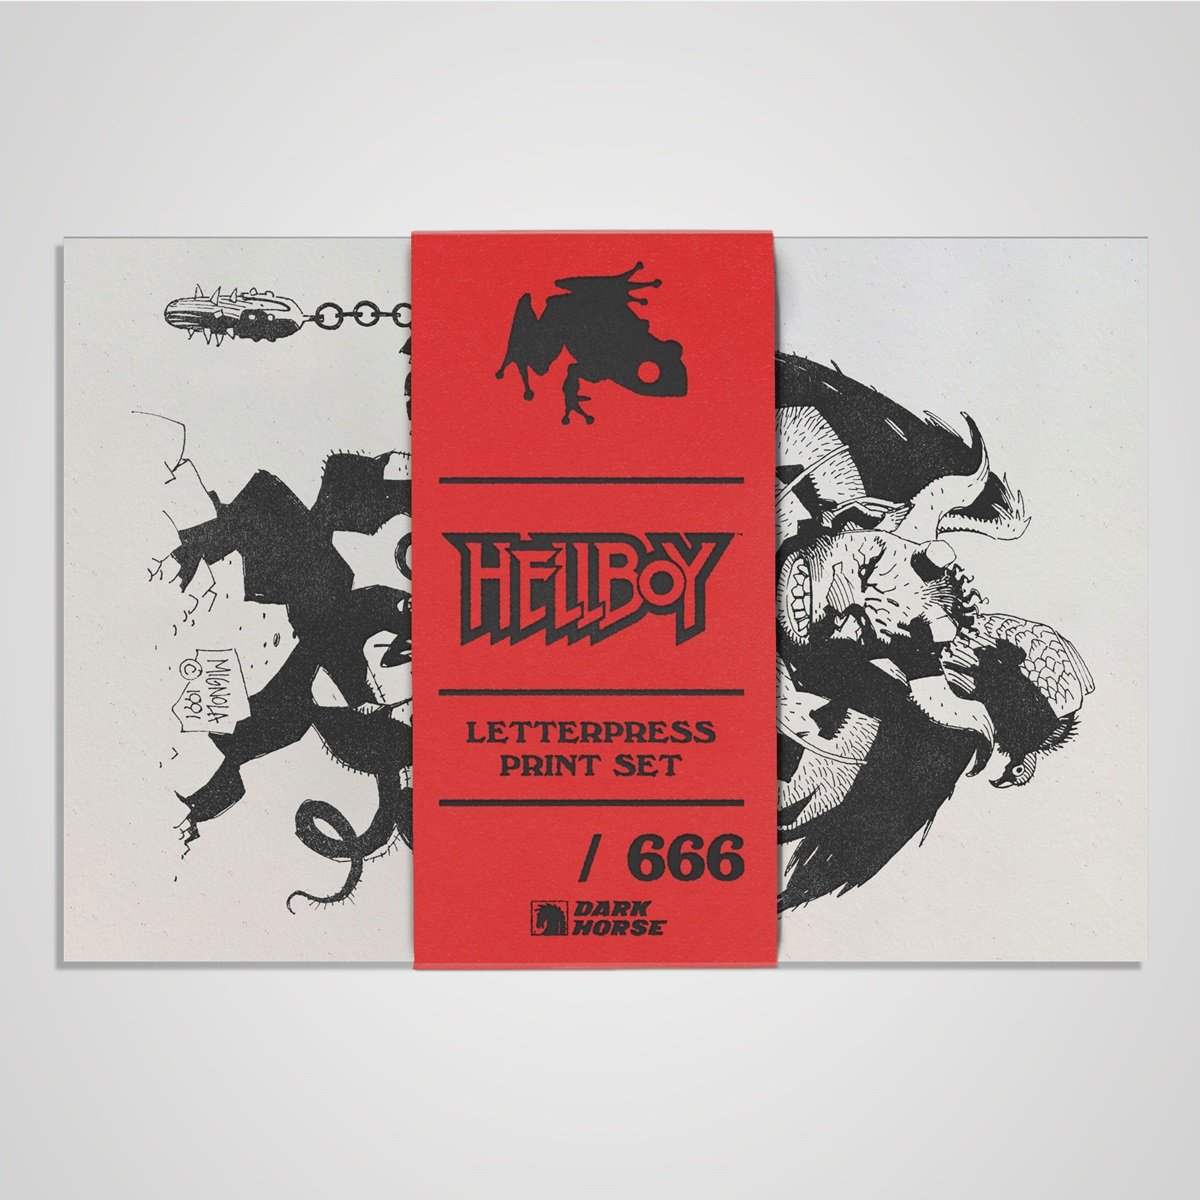 Hellboy Letterpress set cover image with art by creator Mike Mignola.